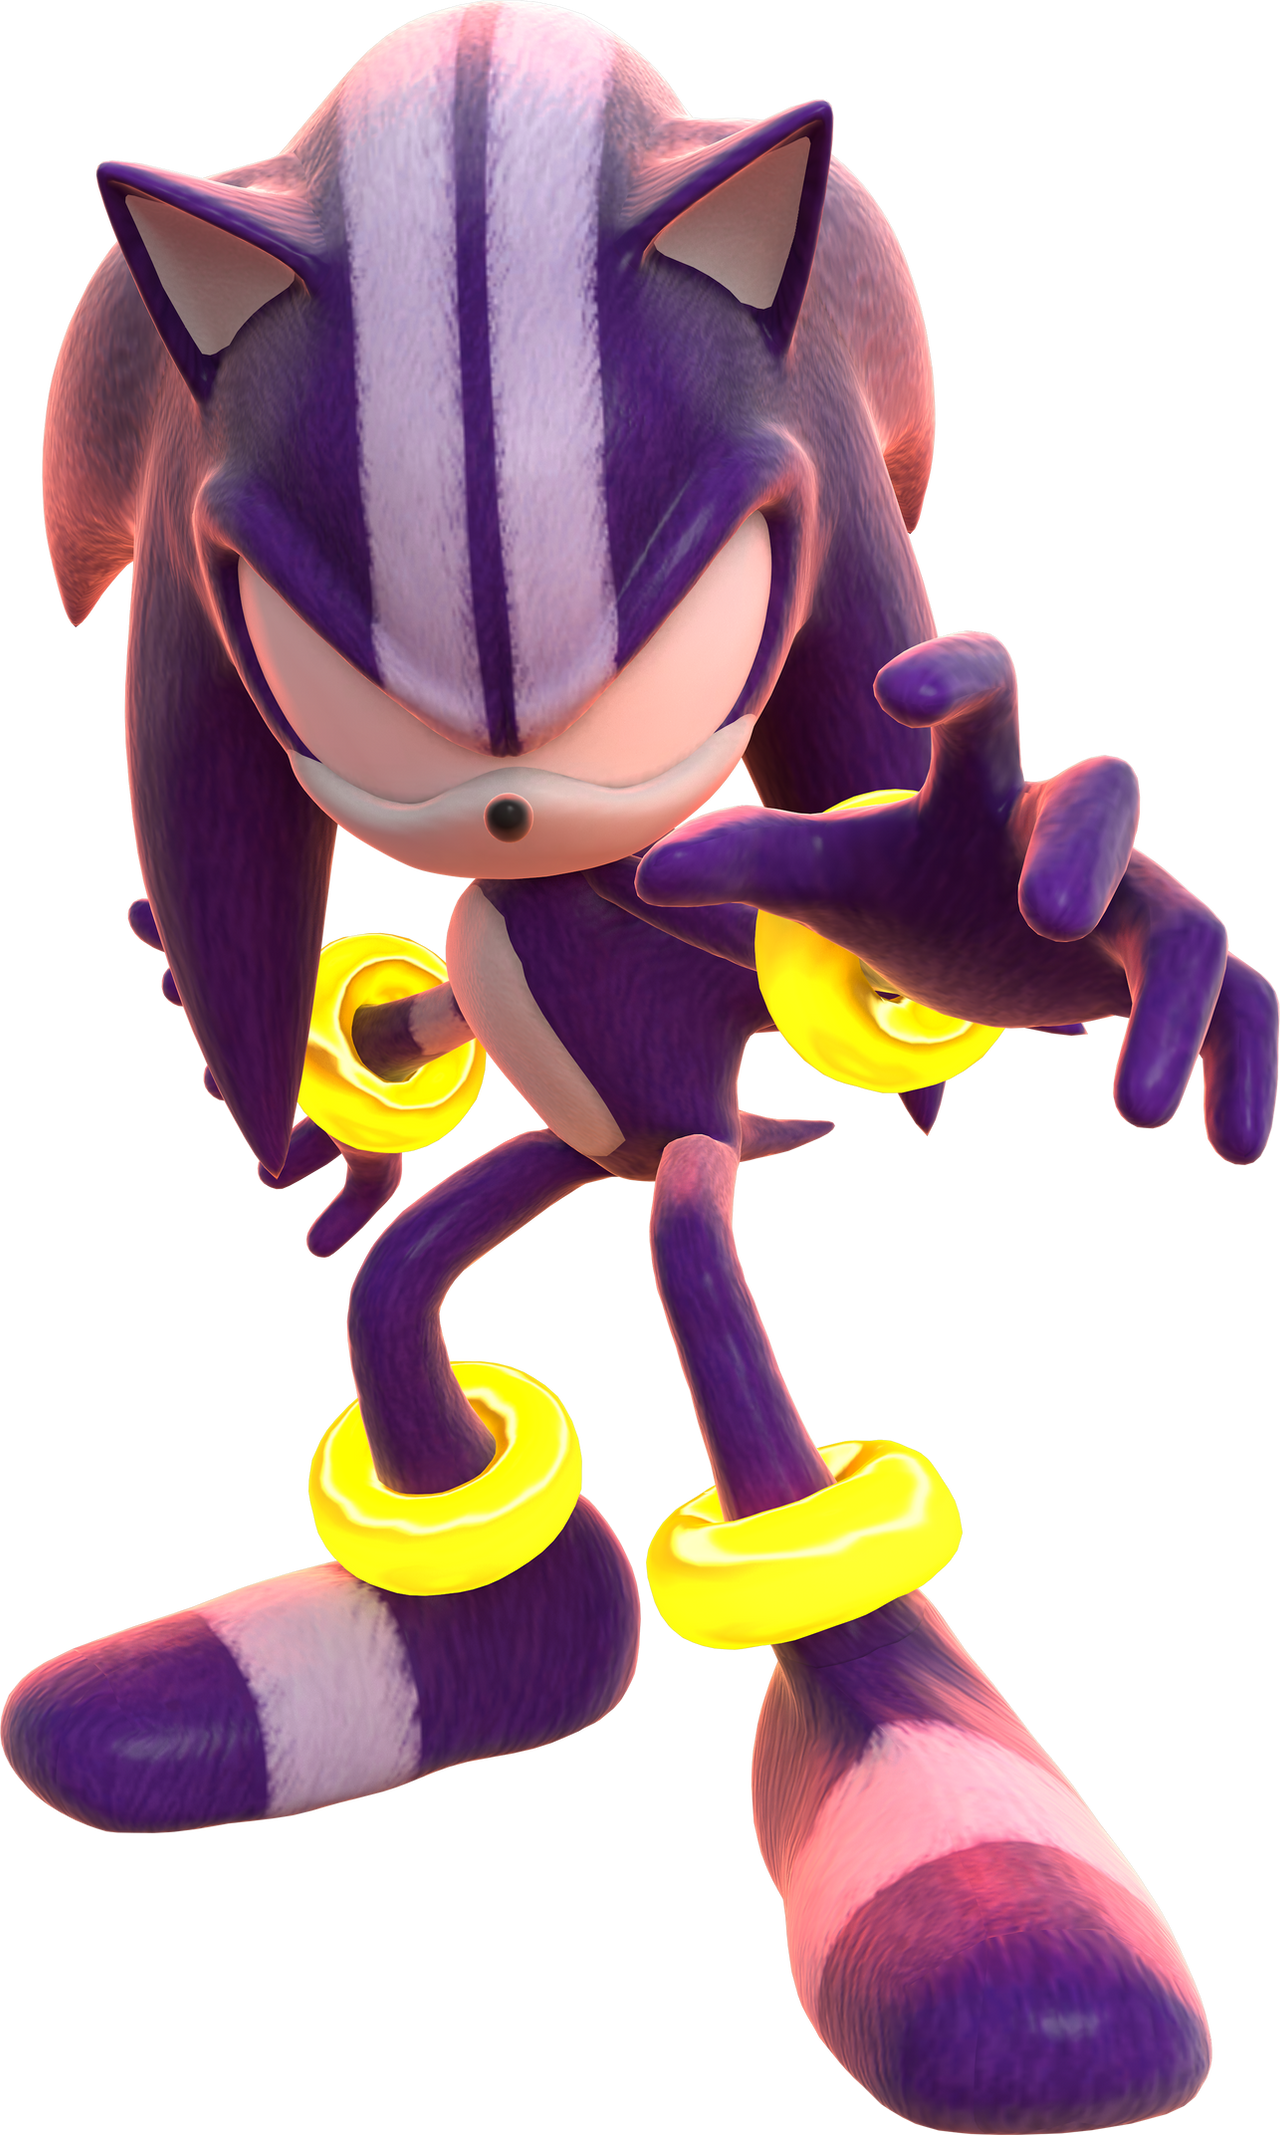 darkspine_sonic_by_mateus2014_d9k9aas-fullview.png